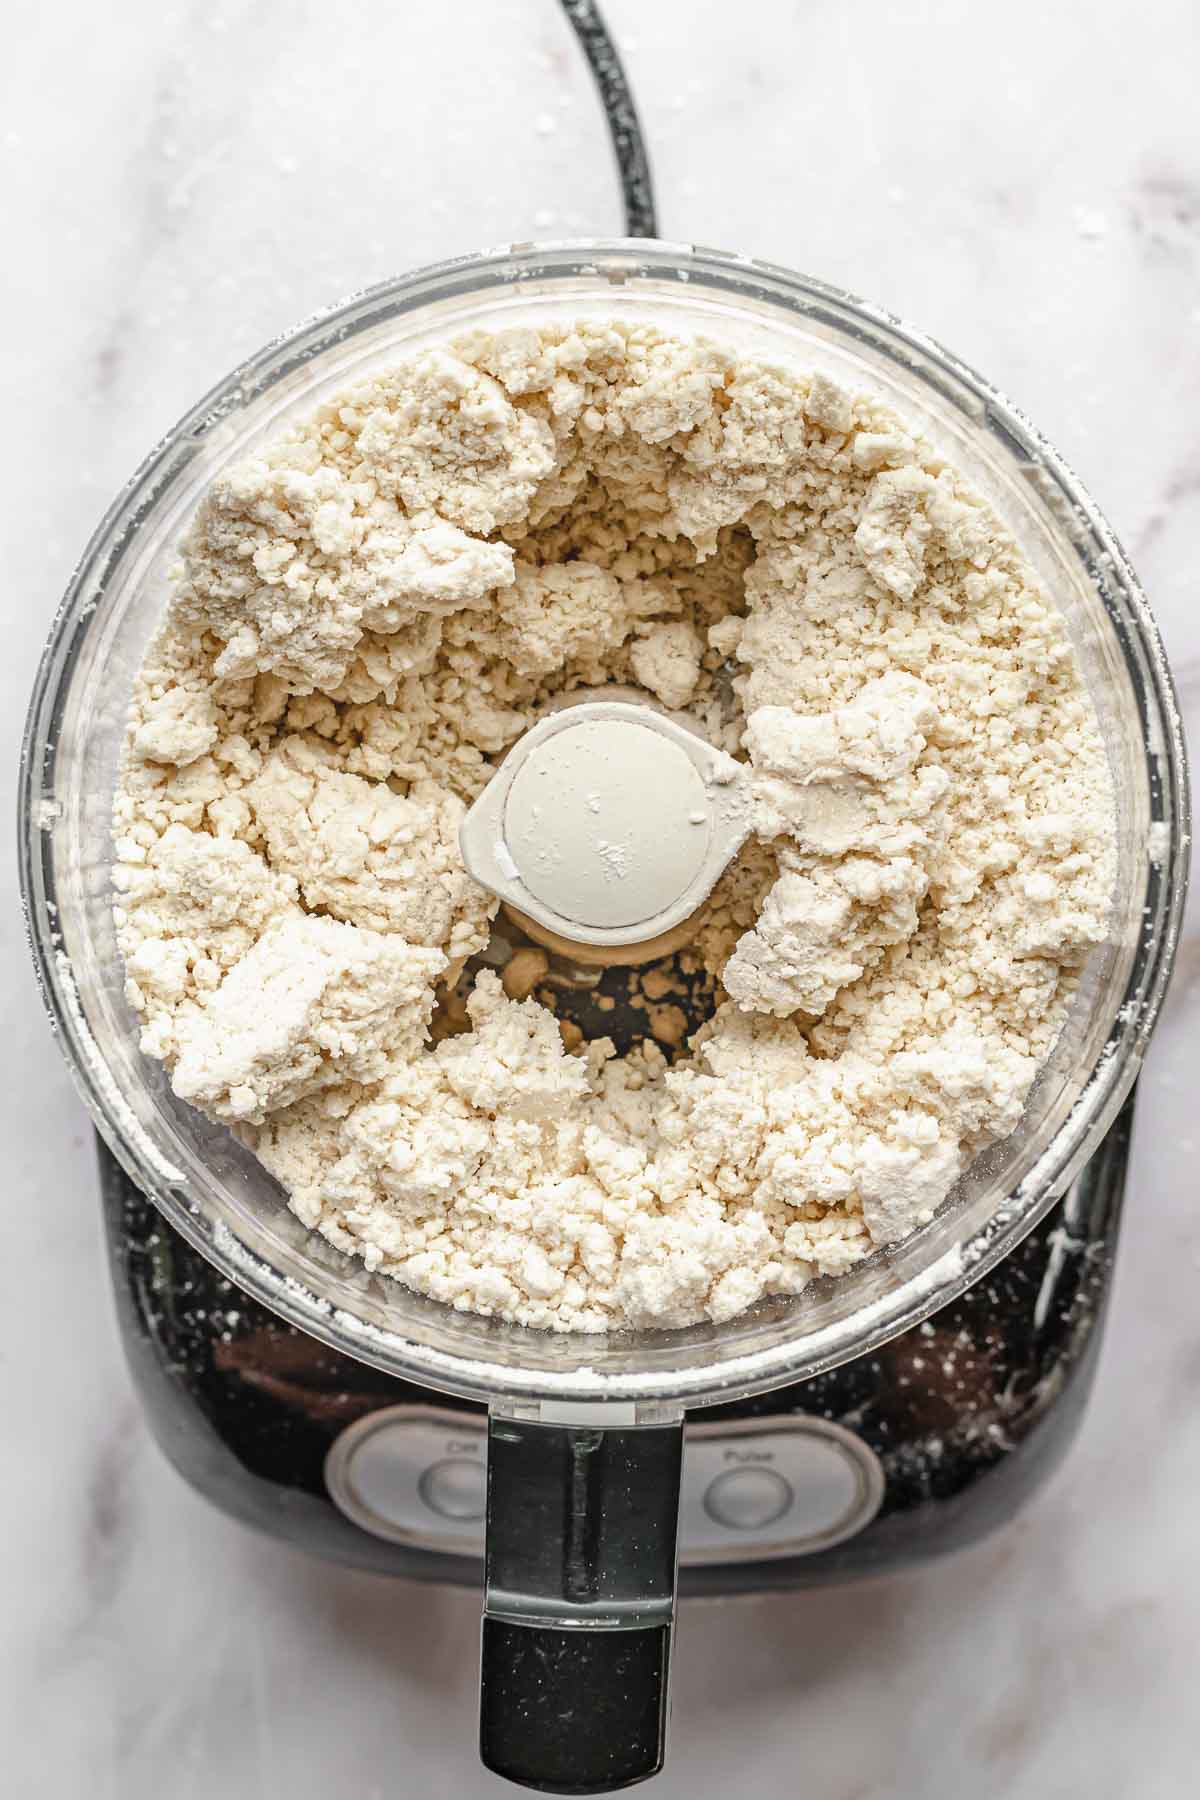 Crumbly pie dough in a food processor.